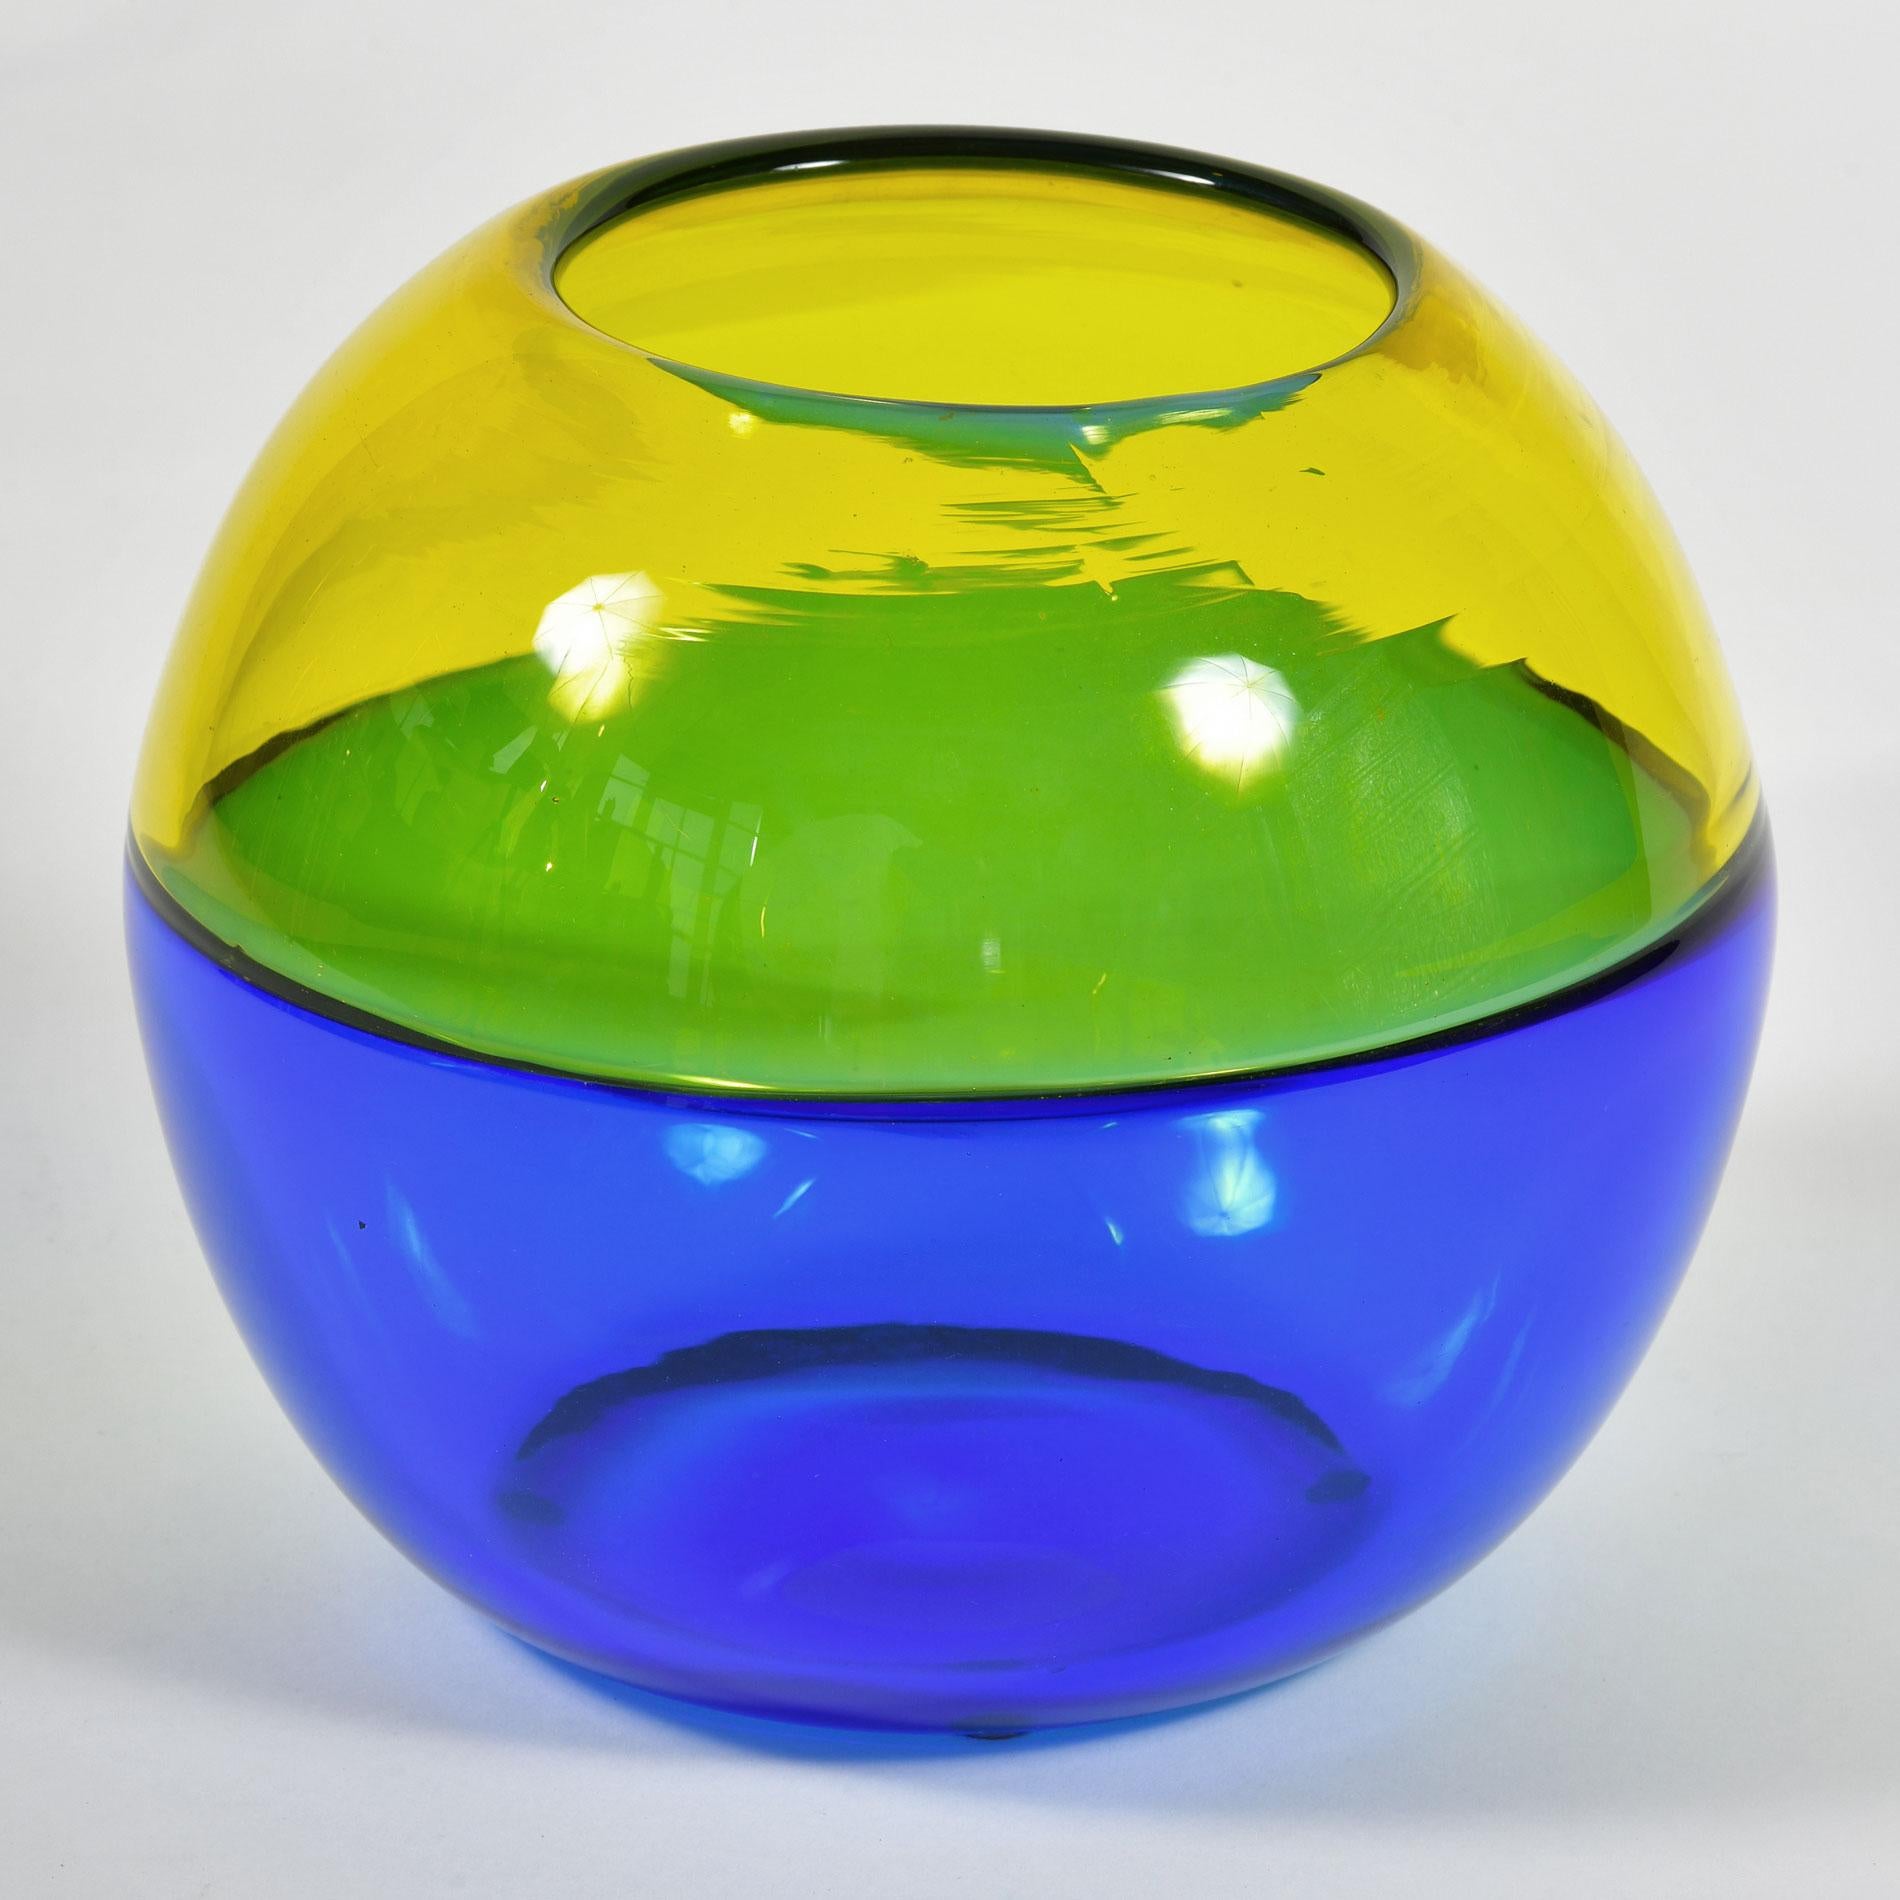 Perfect-sized vintage globe vase in vibrant contrasting bright blue and yellow. Signed.